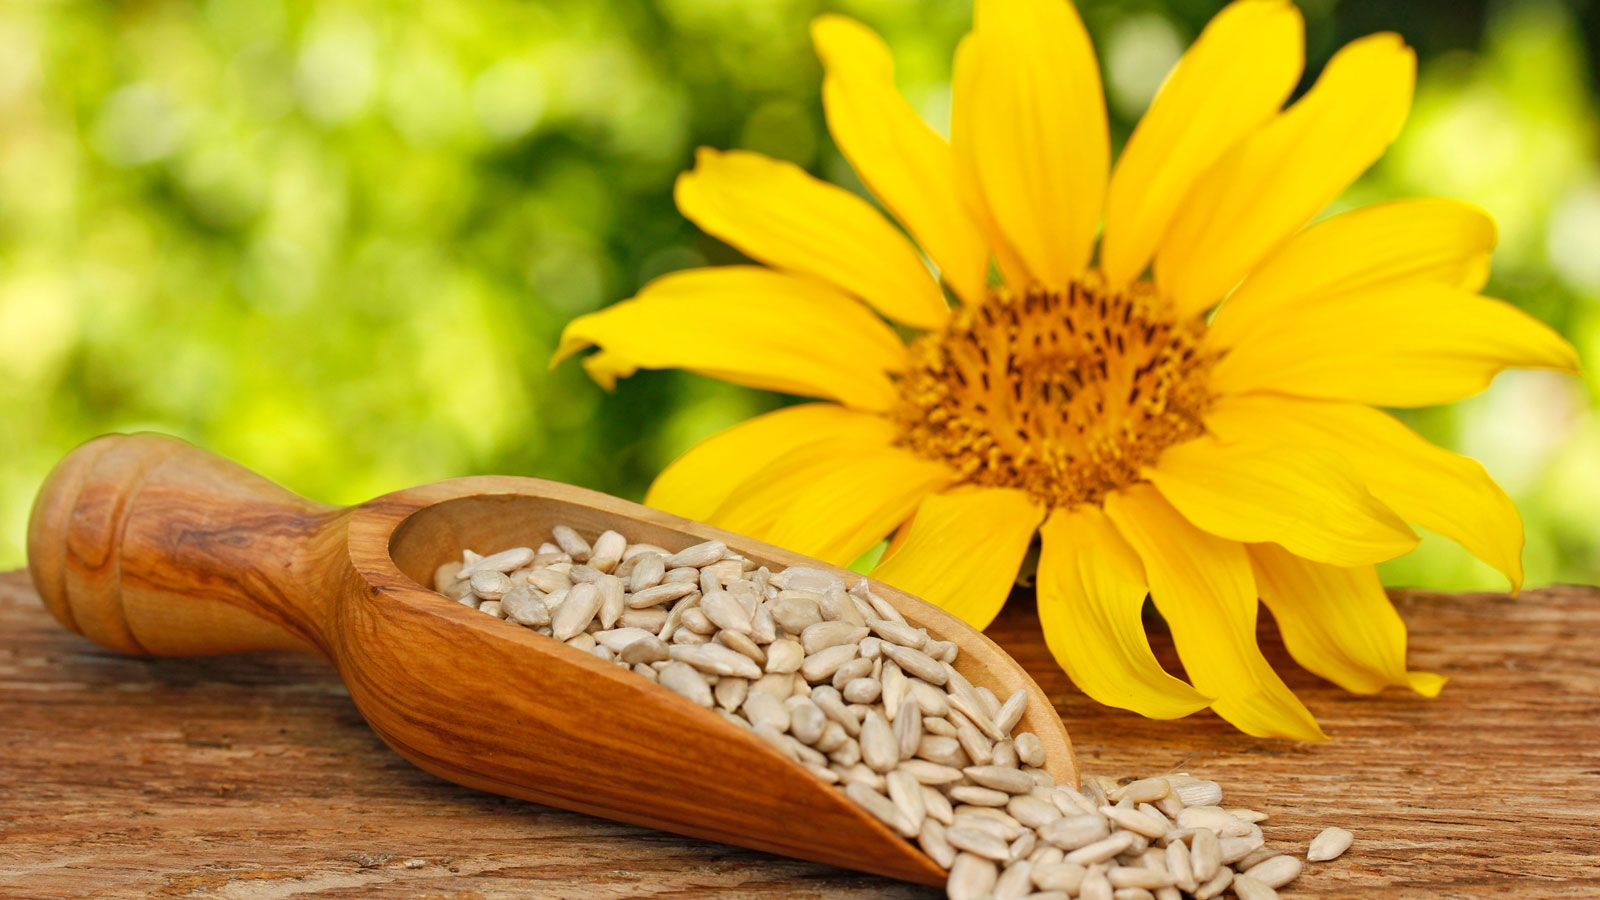 Best edible seeds: 10 nutritious seeding plants to harvest